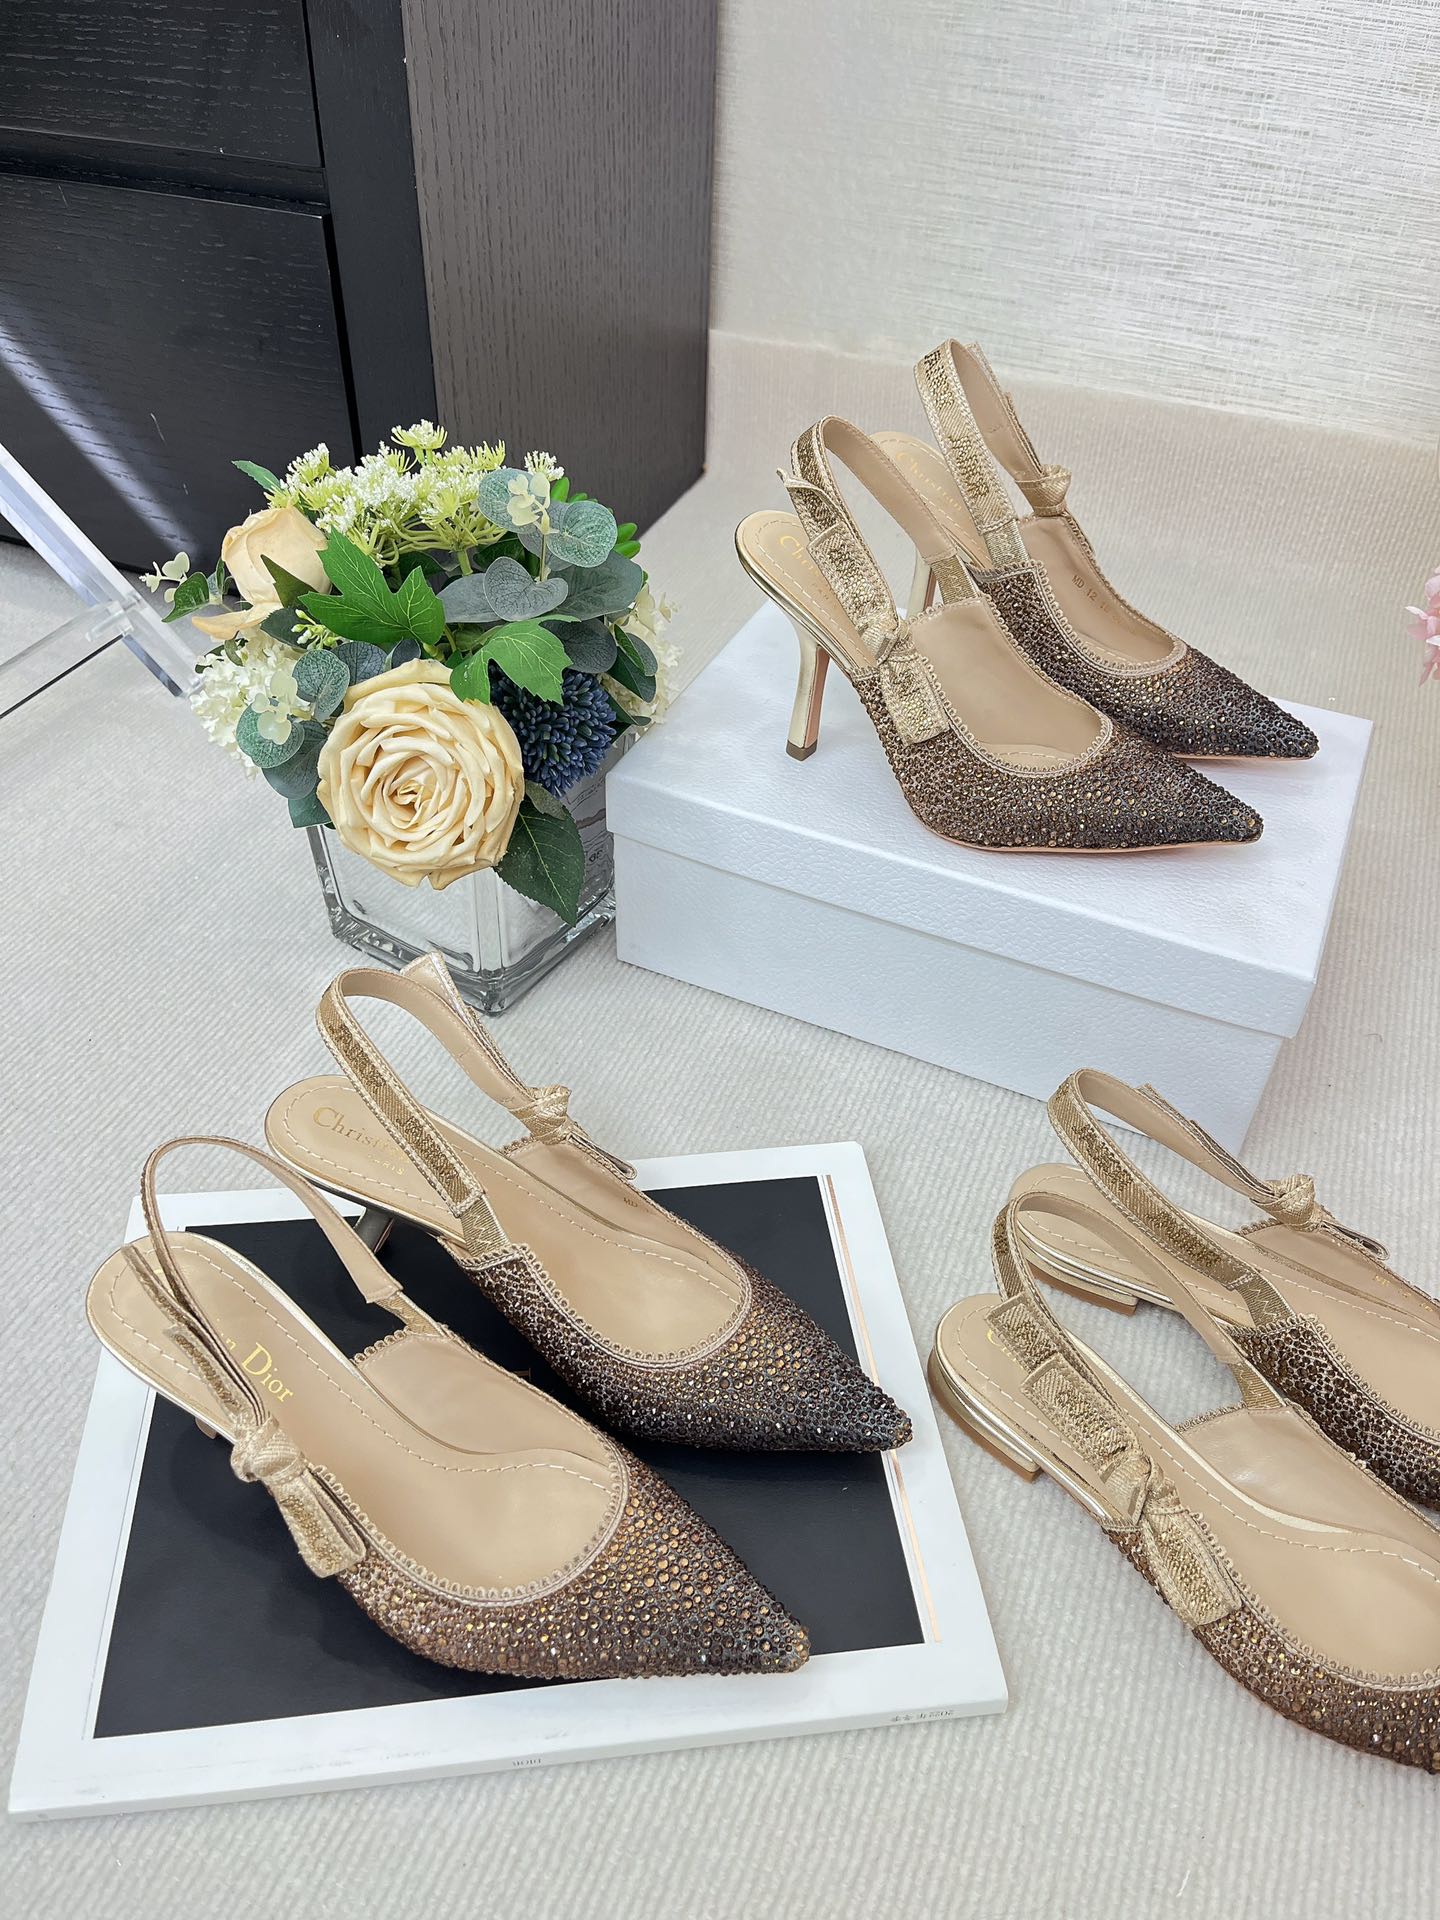 Dior Shoes High Heel Pumps Gold Embroidery Cotton